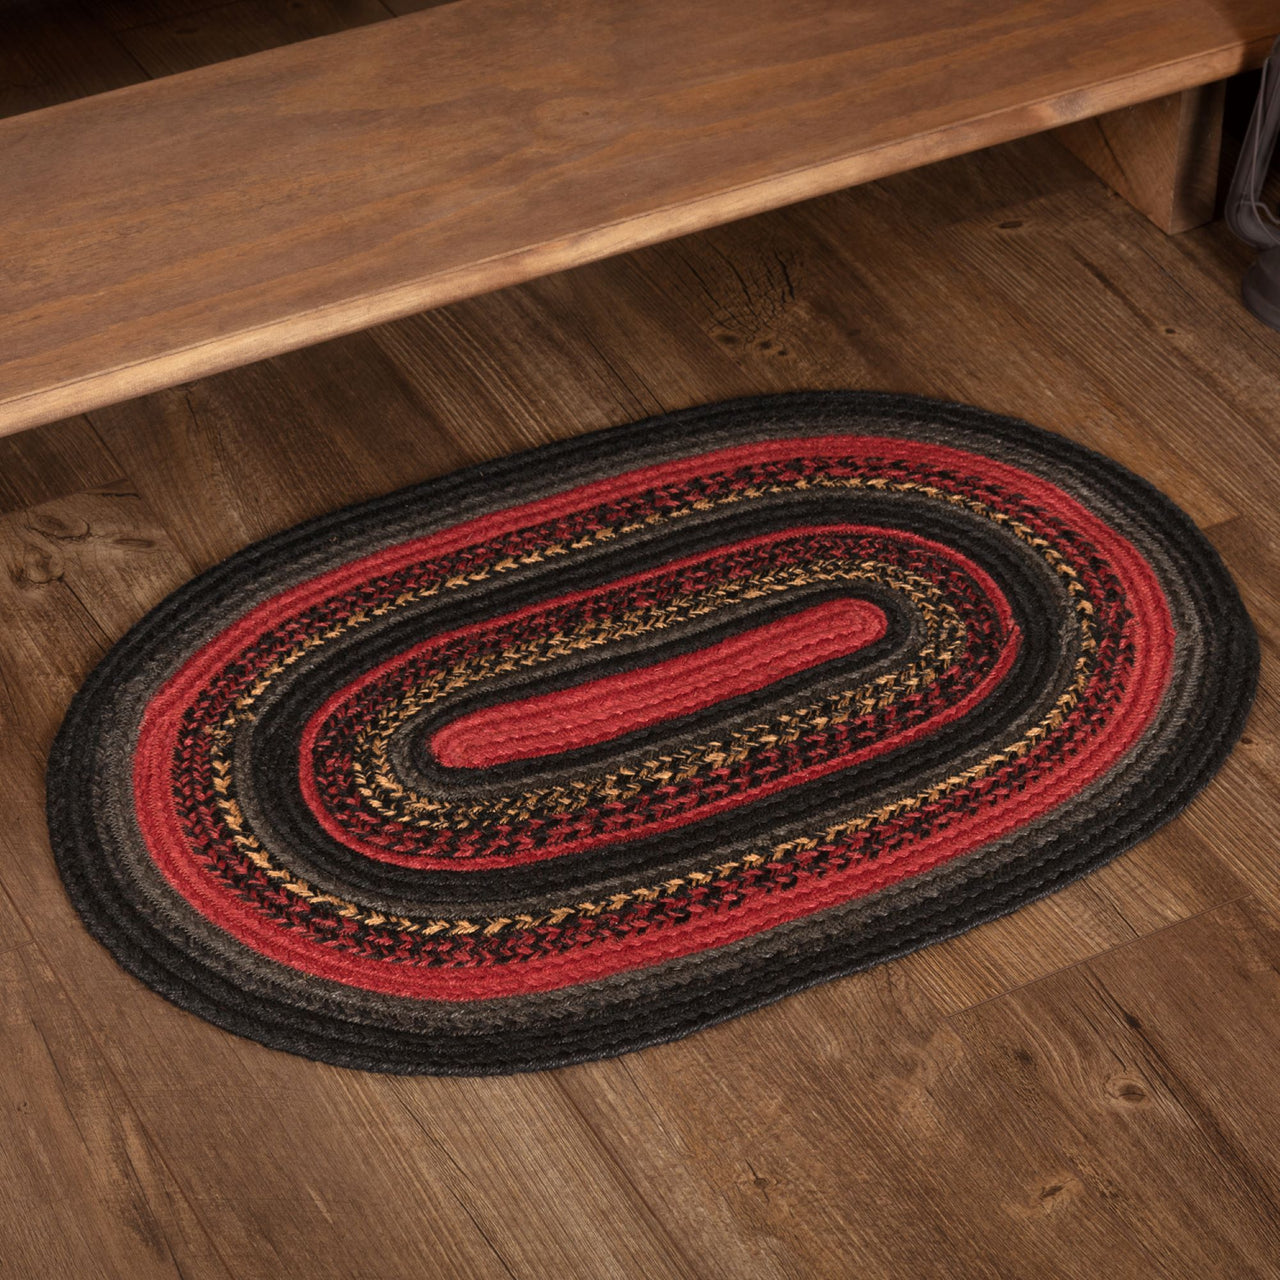 Cumberland Jute Braided Rug Oval 20"x30" with Rug Pad VHC Brands